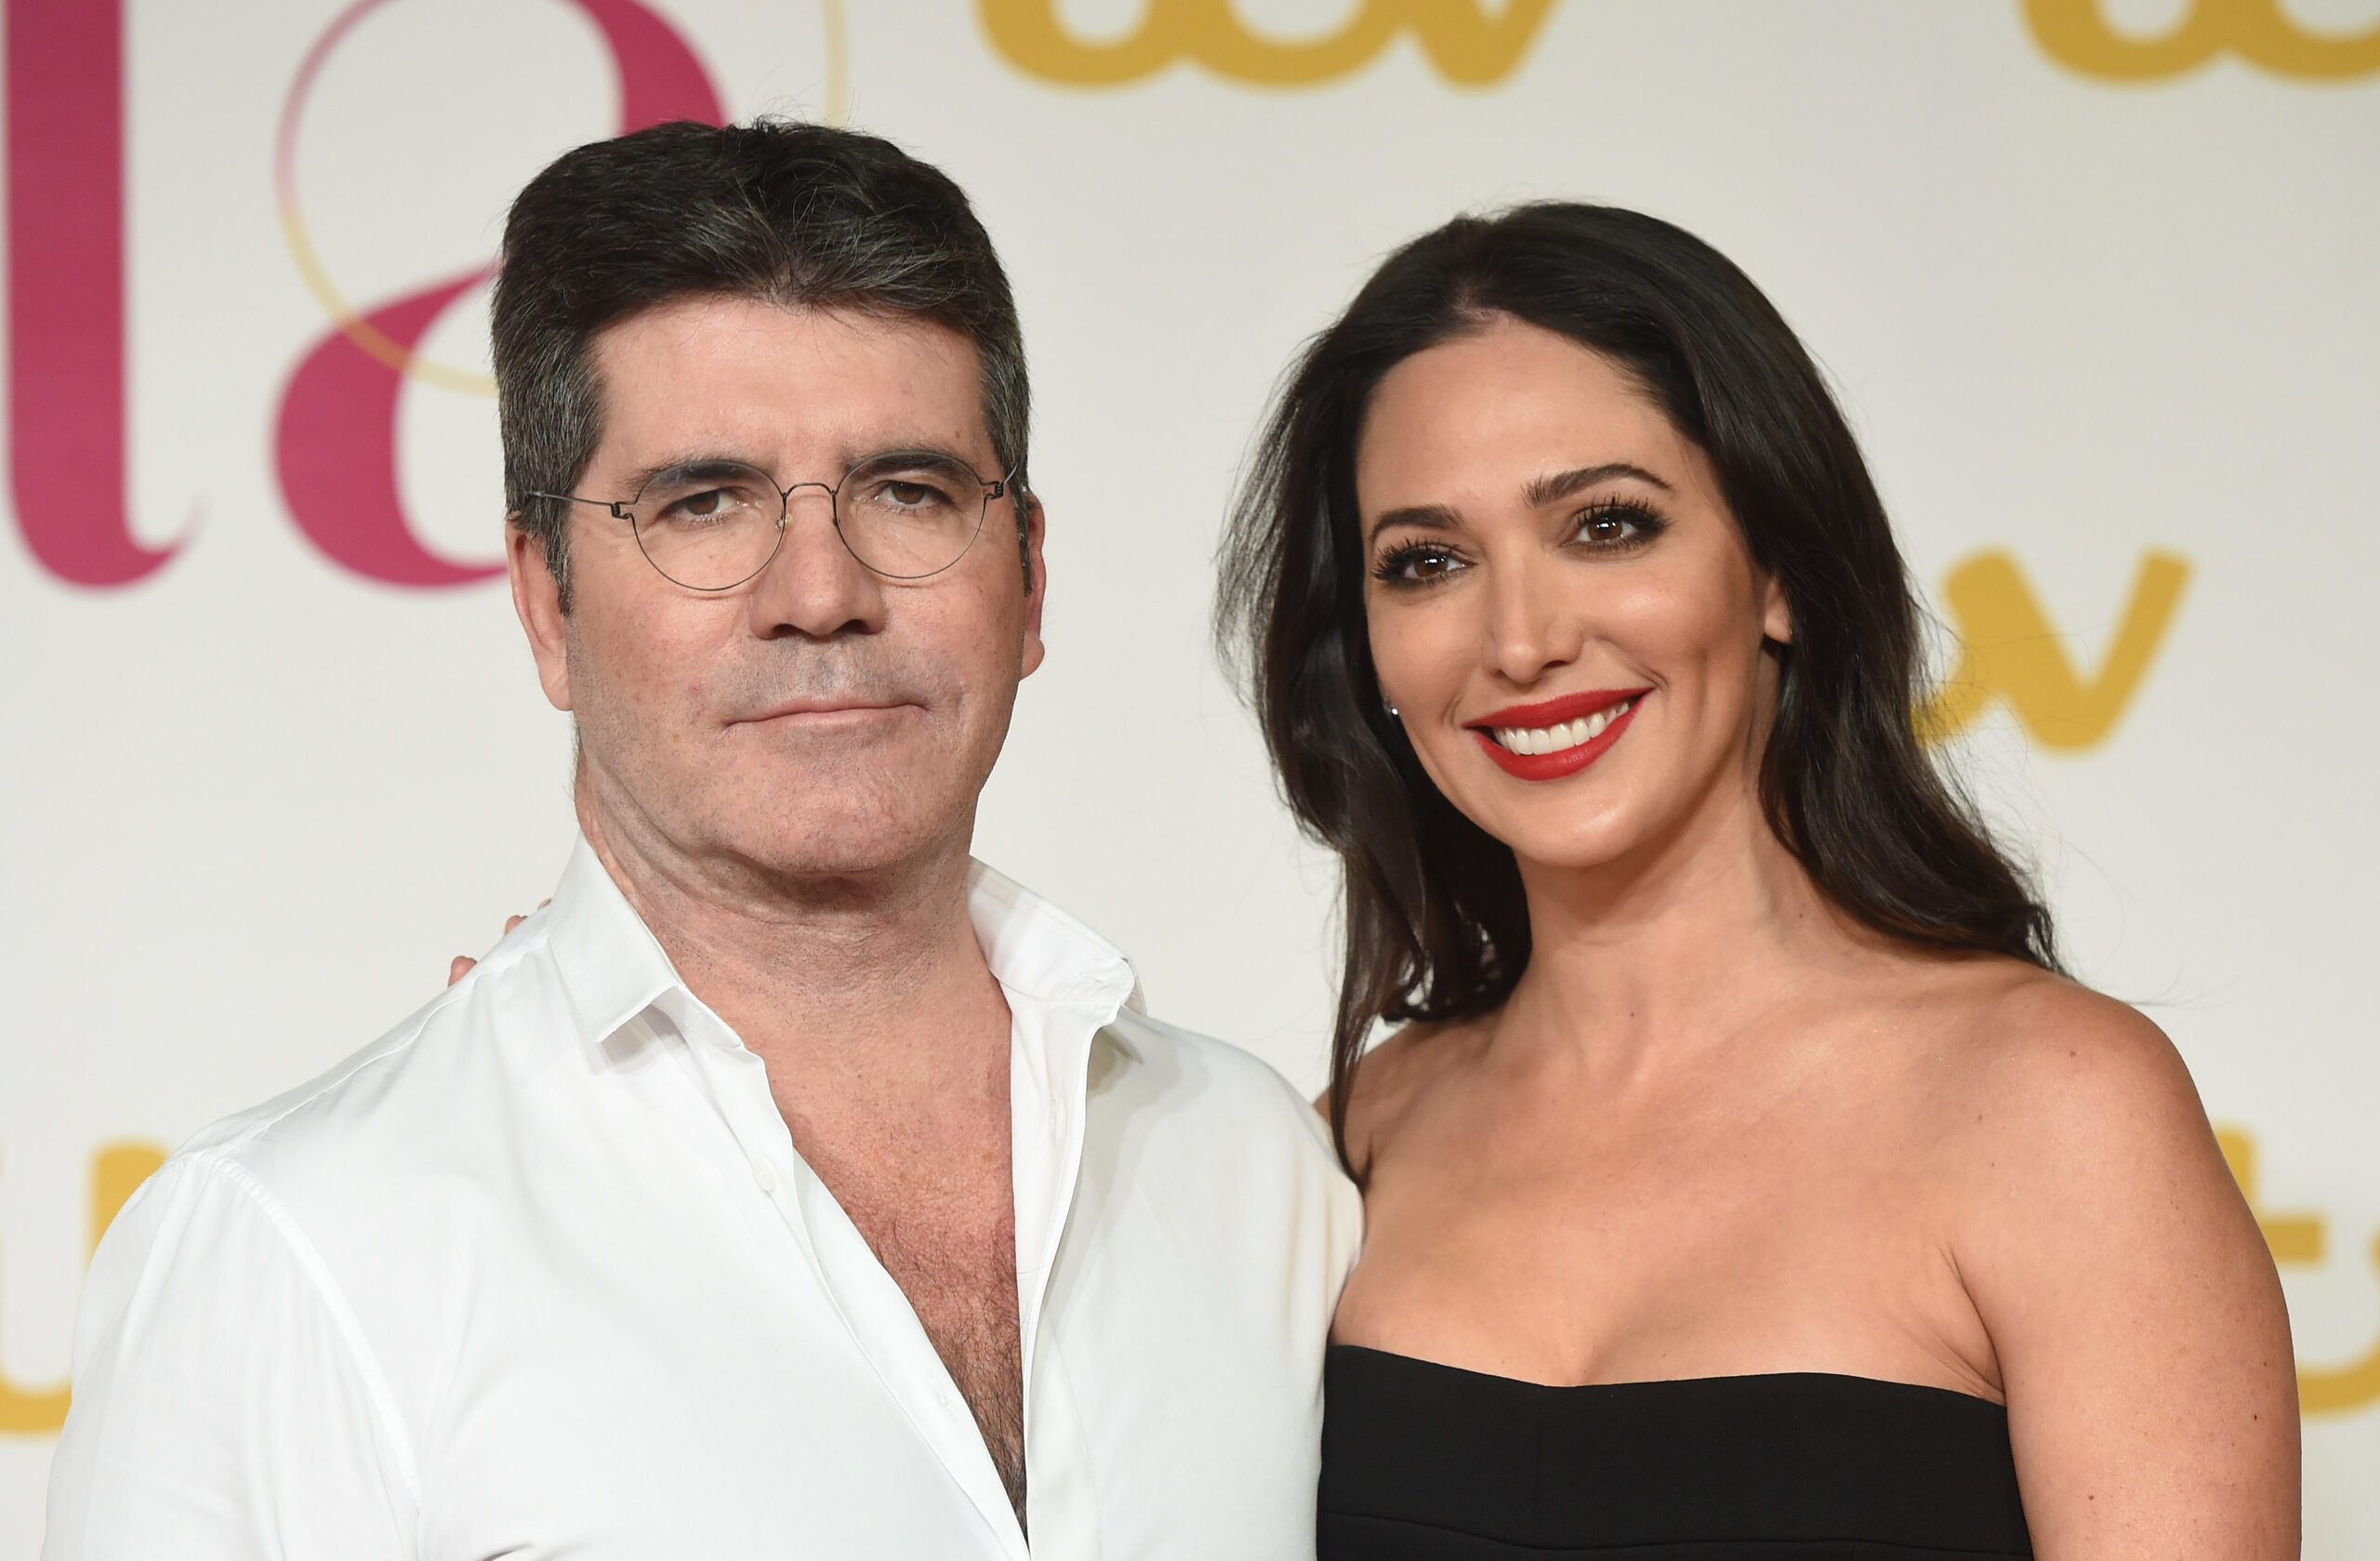 Is Simon Cowell married?